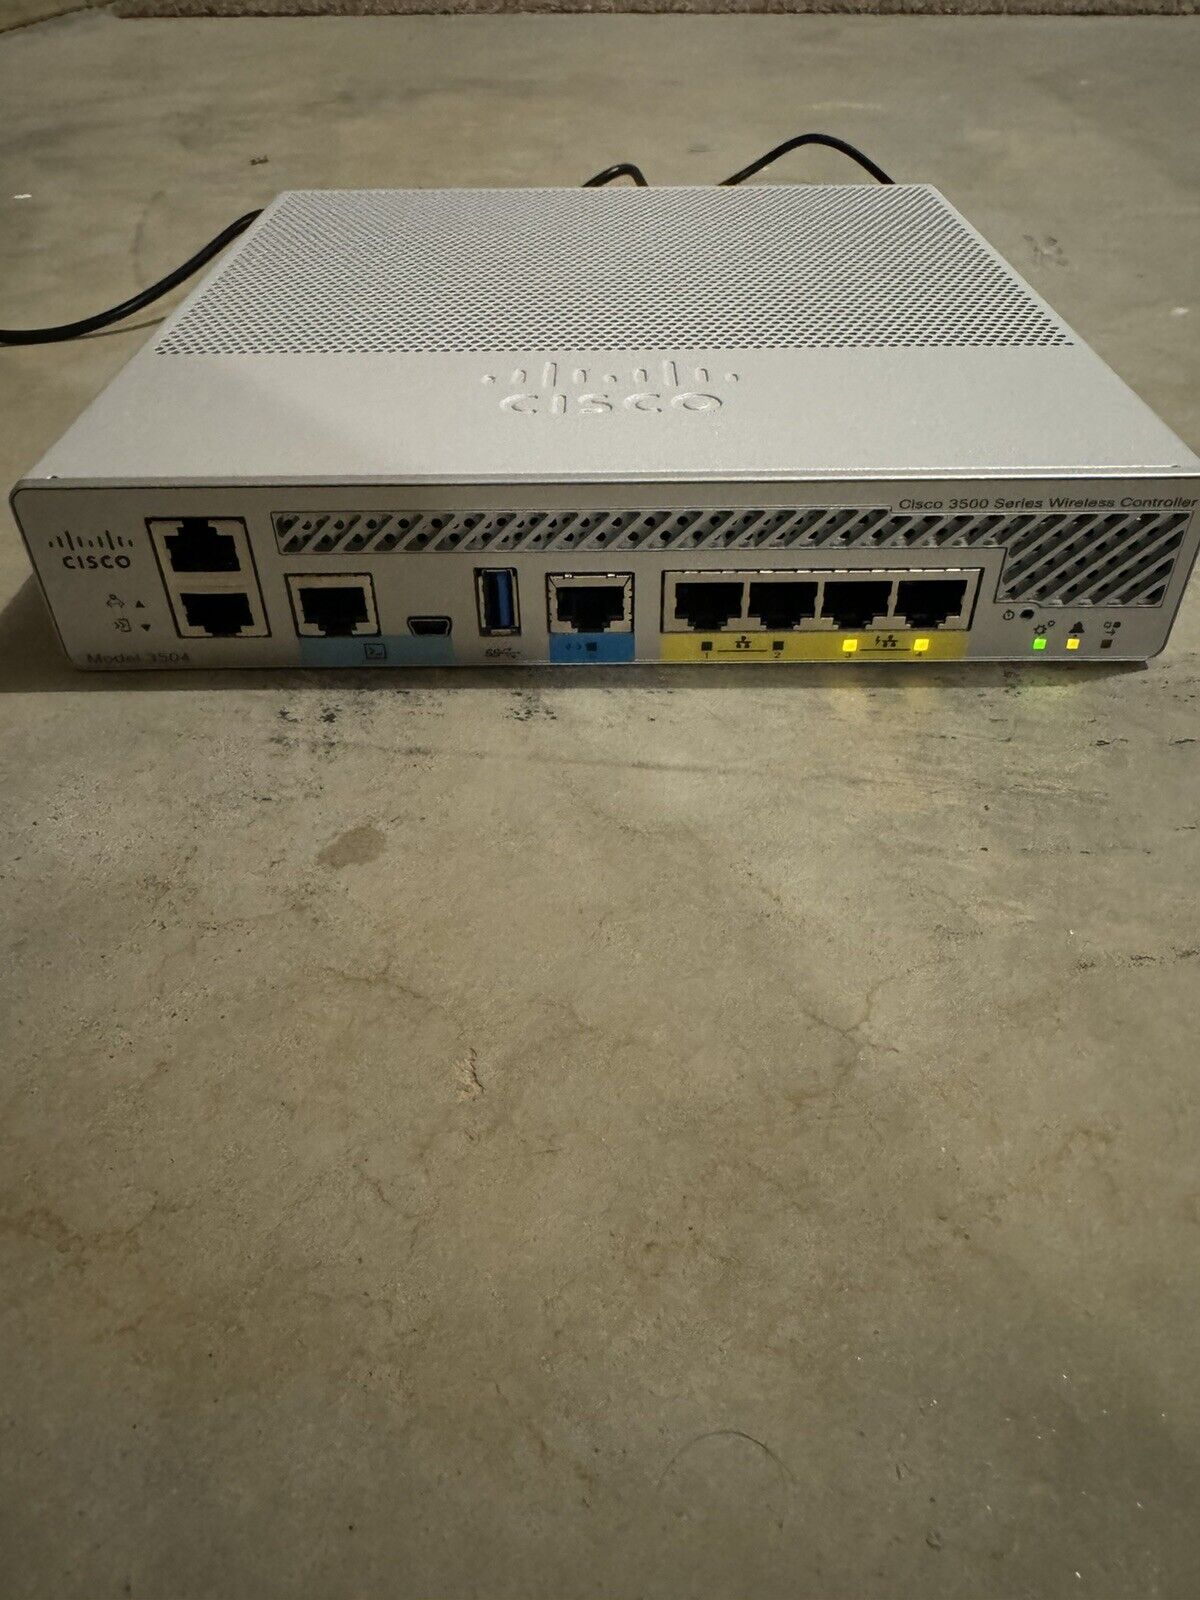 Cisco AIR-CT3504-K9 Wireless LAN Controller with Power Supply